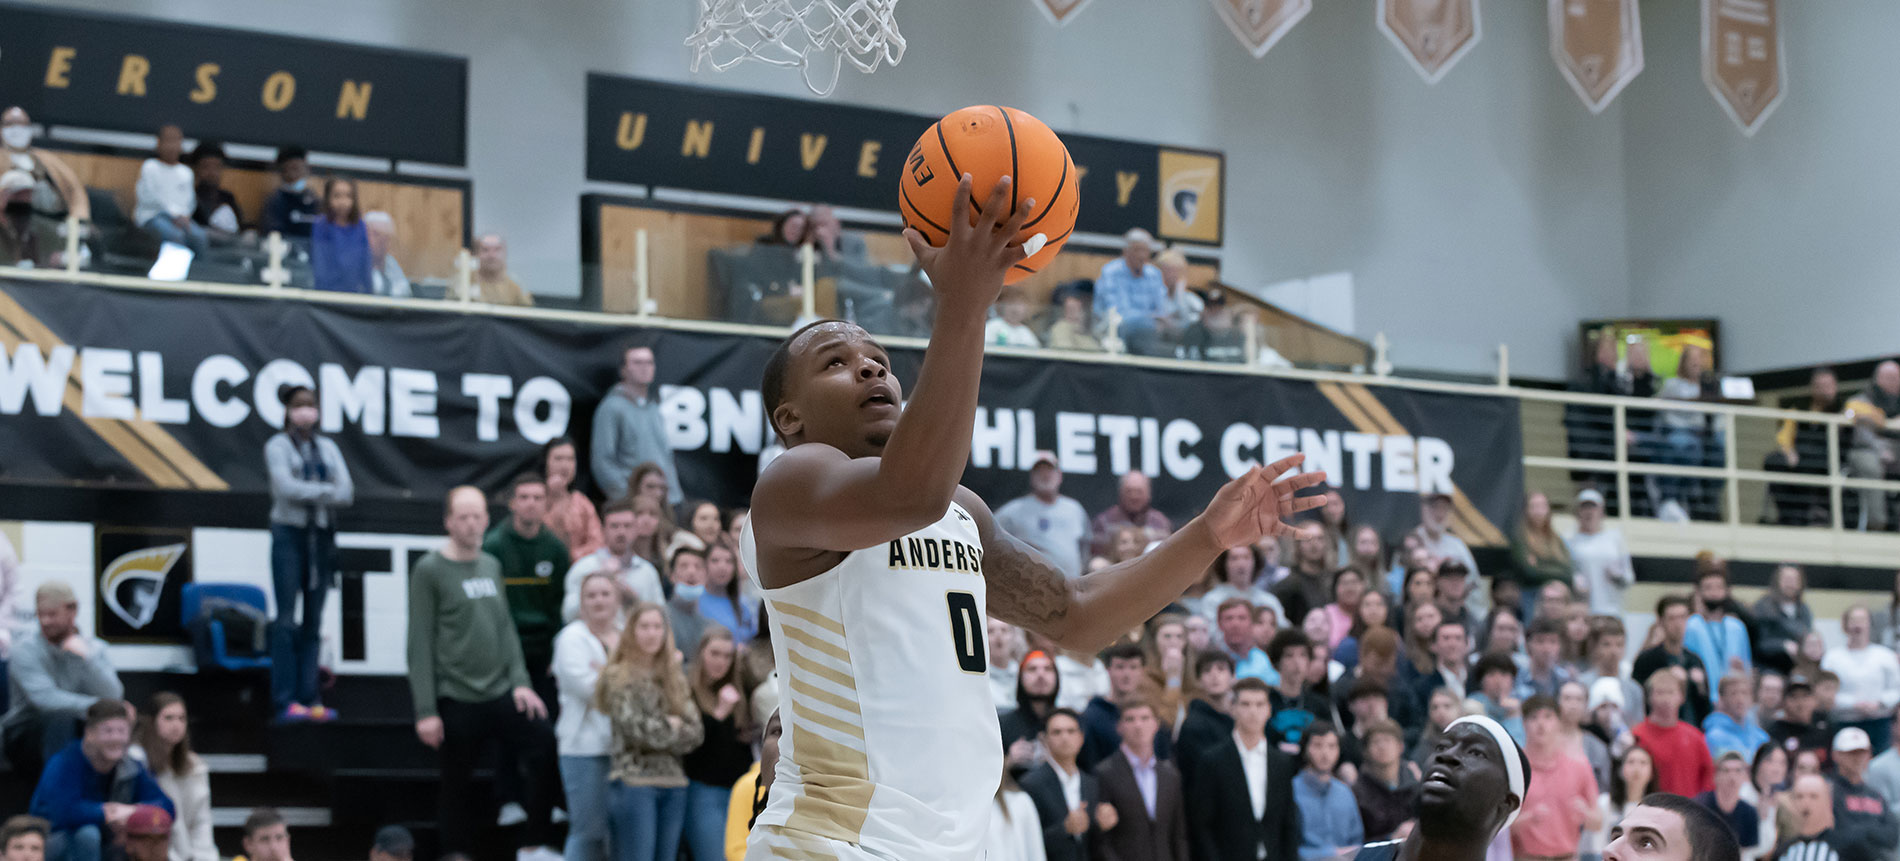 James Becomes 16th Player in Program History to Reach 1,000 Career Points in Men’s Basketball Loss at UVA Wise